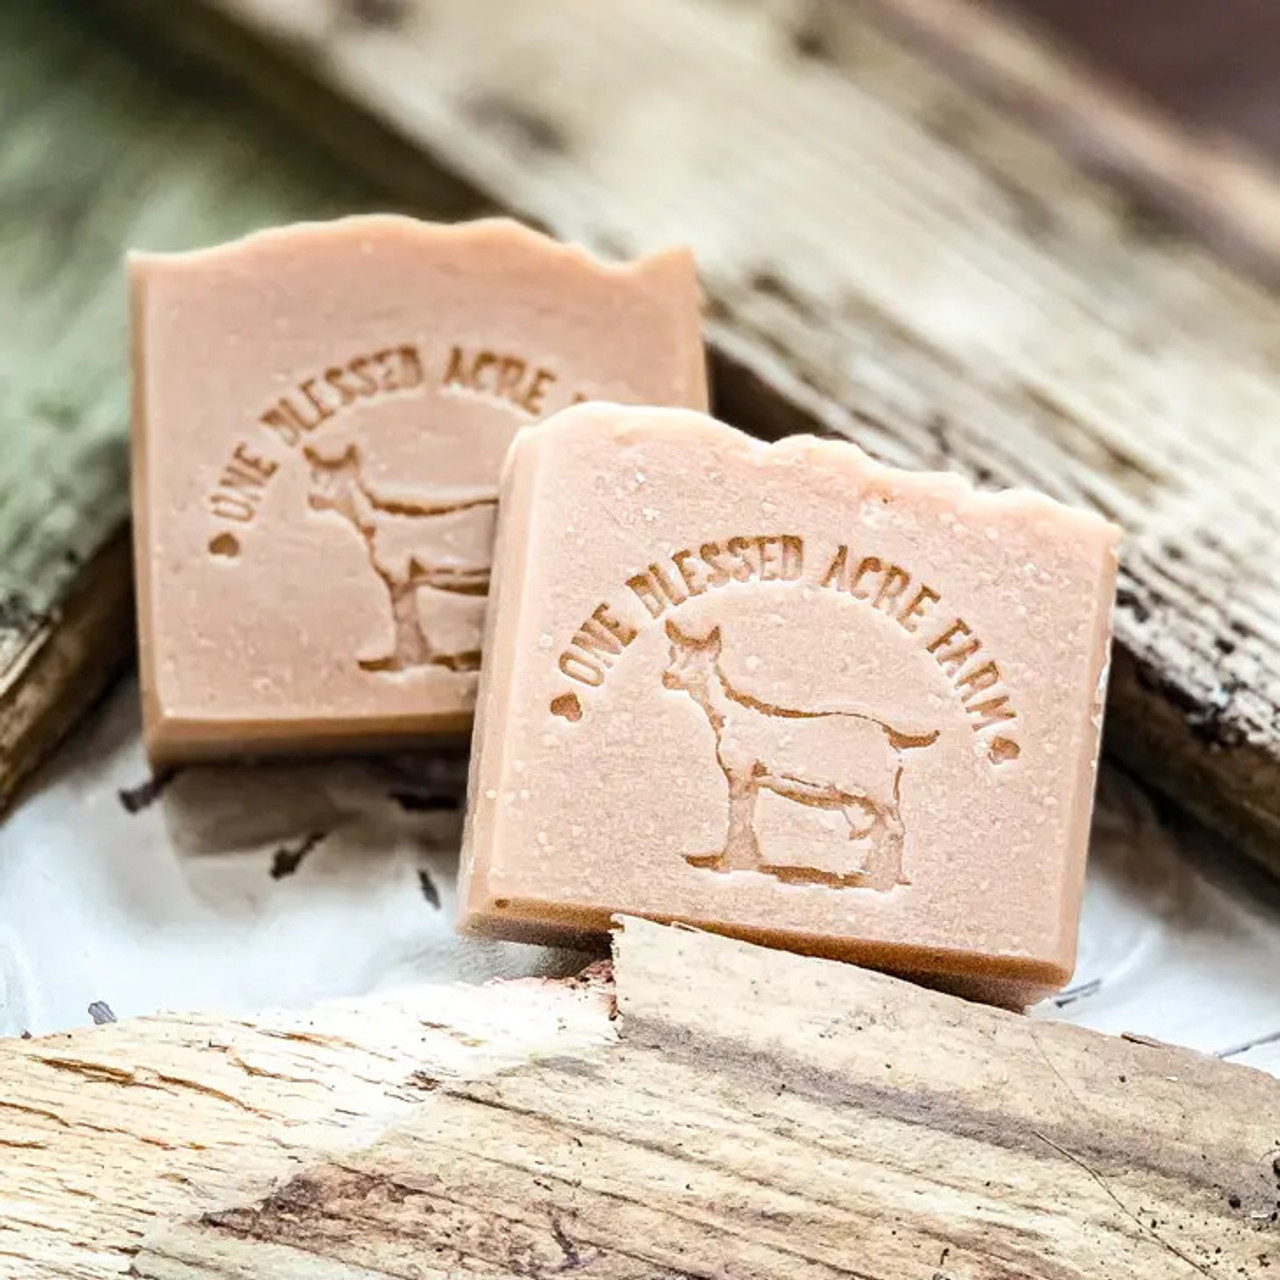 One Blessed Acre Farm Goat Milk Bar Soap - Millbrook Tack